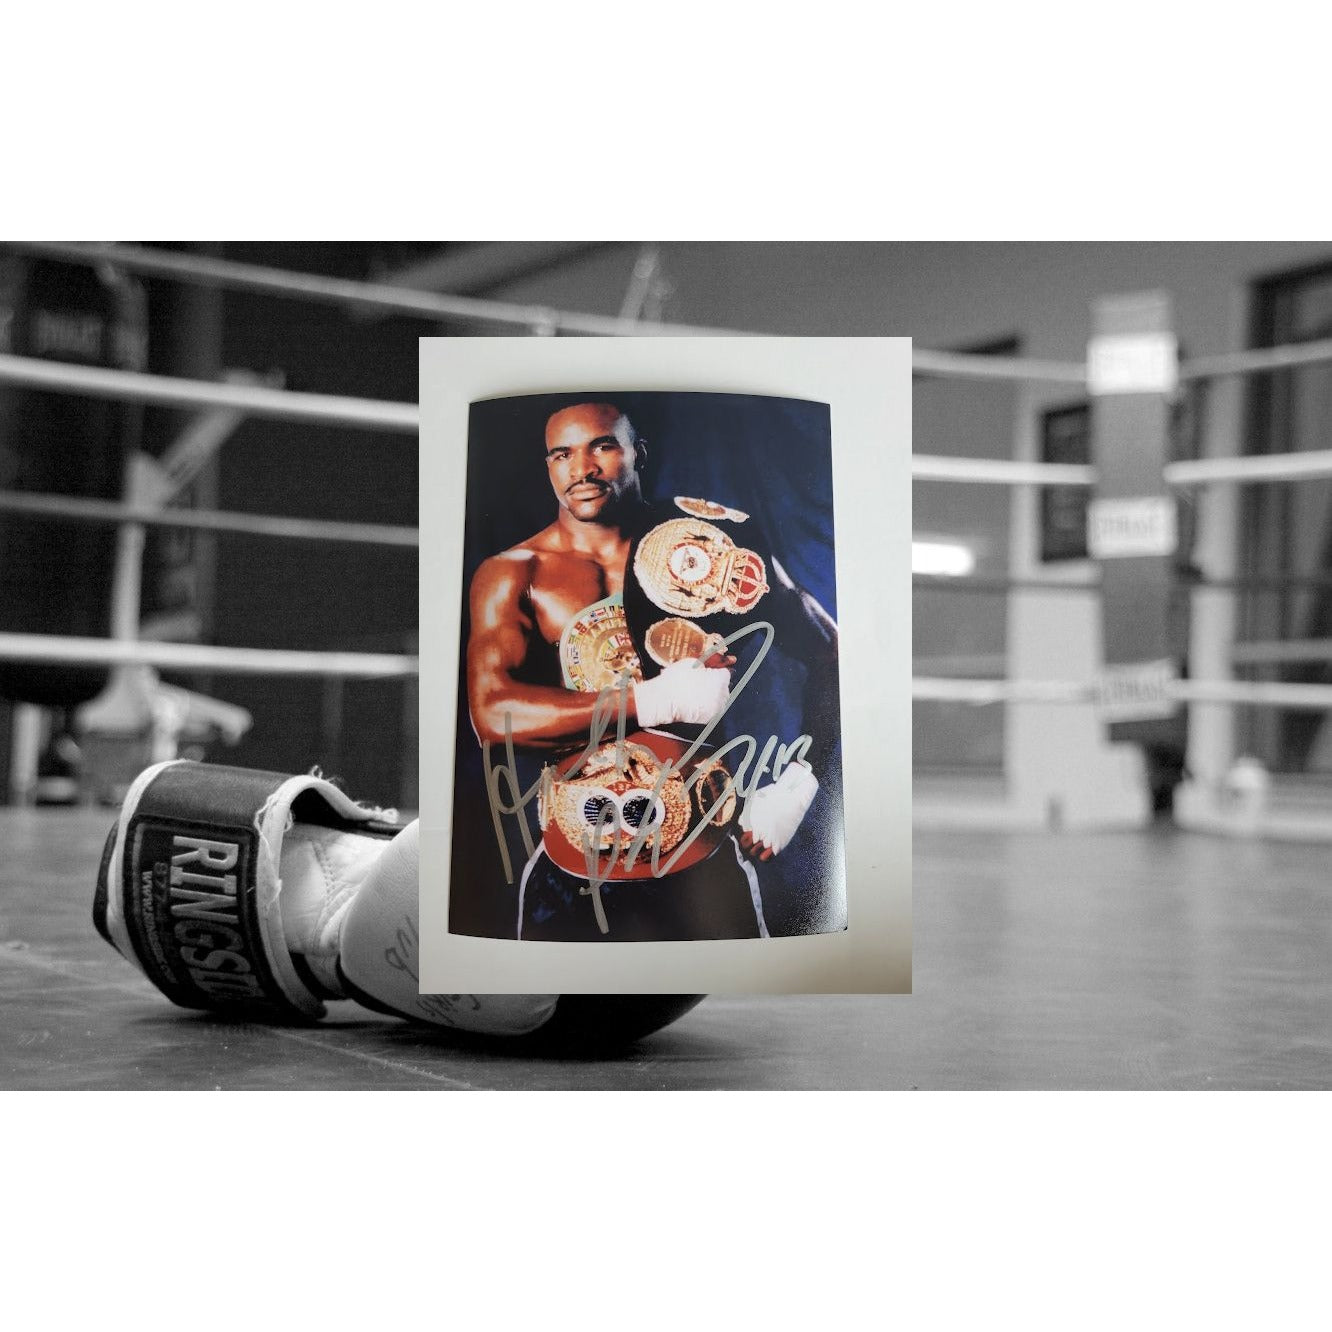 Evander Holyfield 5 x 7 photograph signed